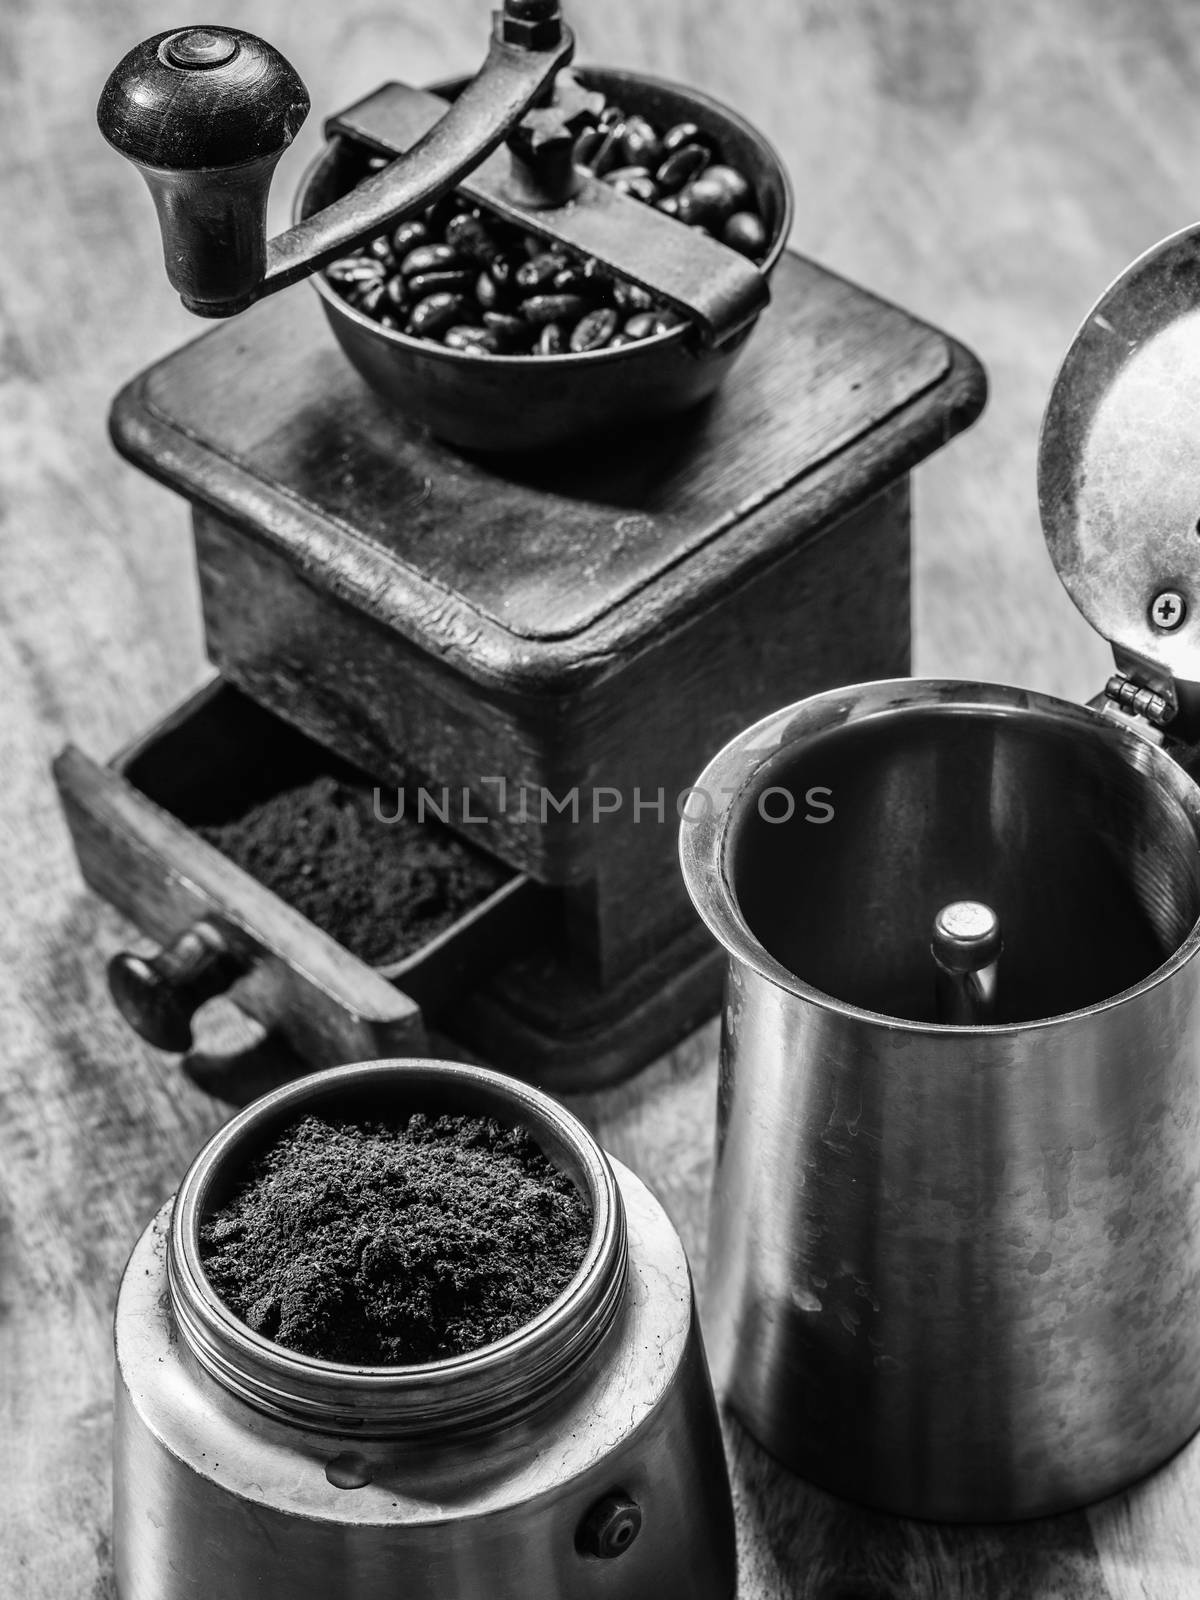 Photo of an Italian Moka Express stovetop coffee maker and a coffee grinder done in black and white.